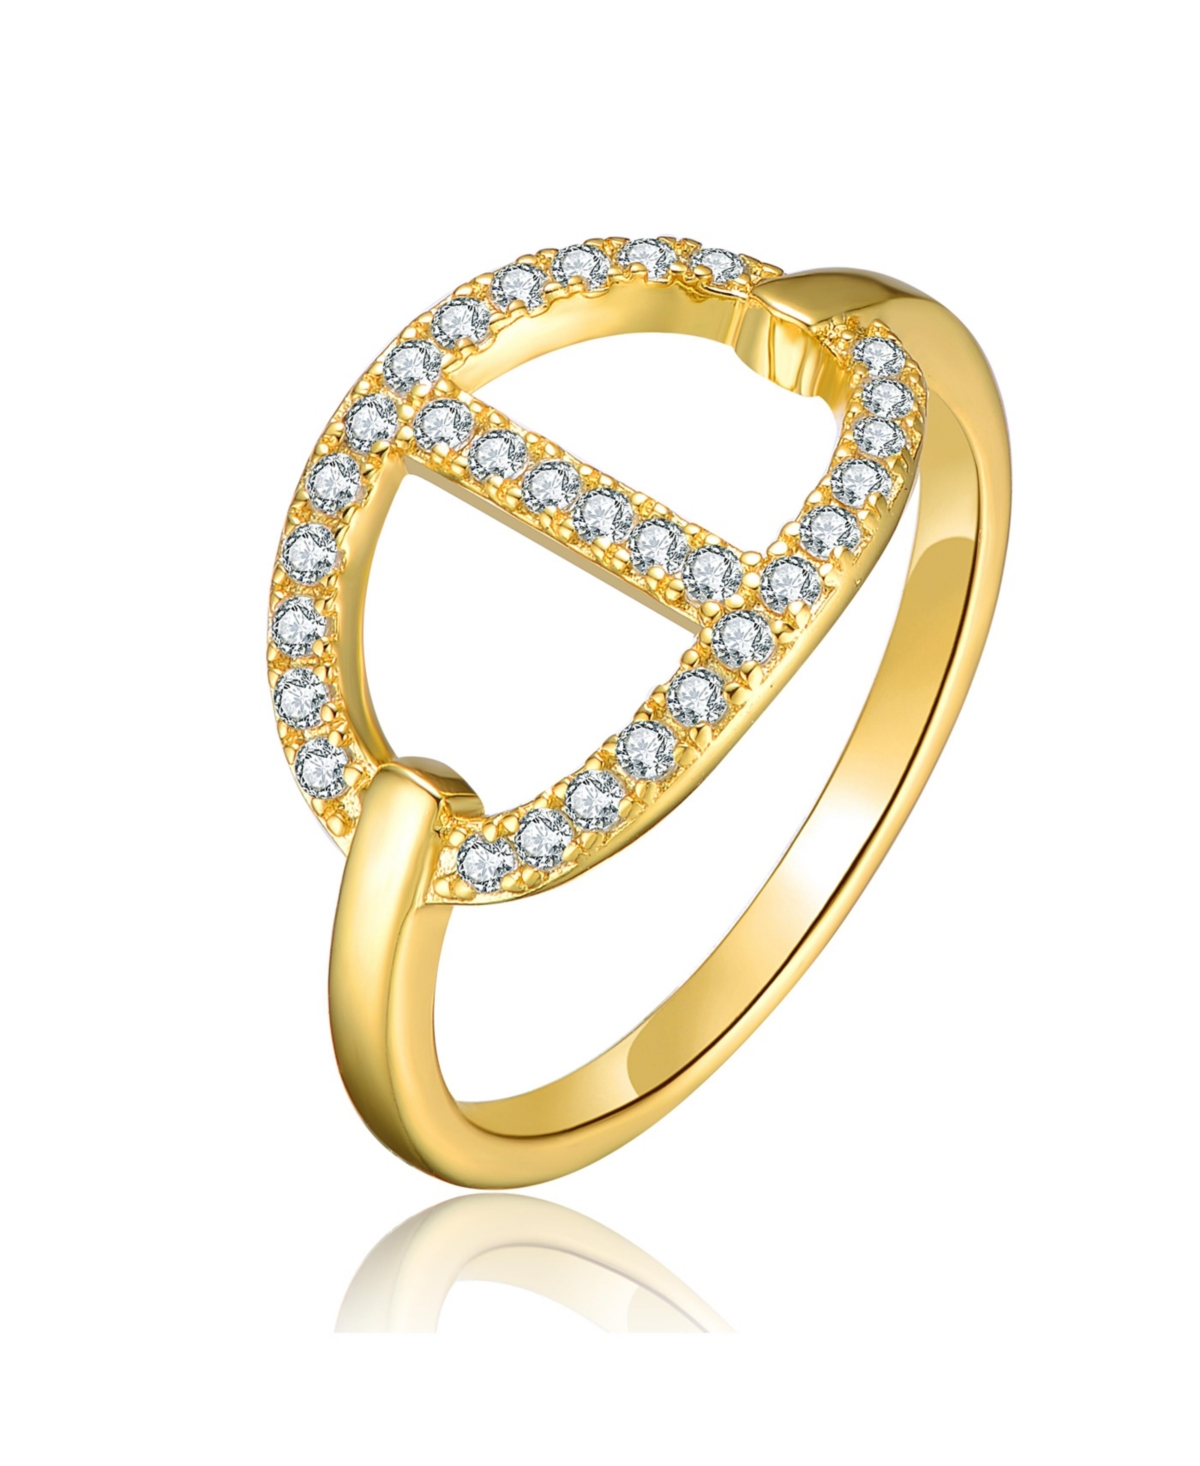 14K Gold Plated with Clear Cubic Zirconia Featuring a Mesmerizing Design Ring - Gold